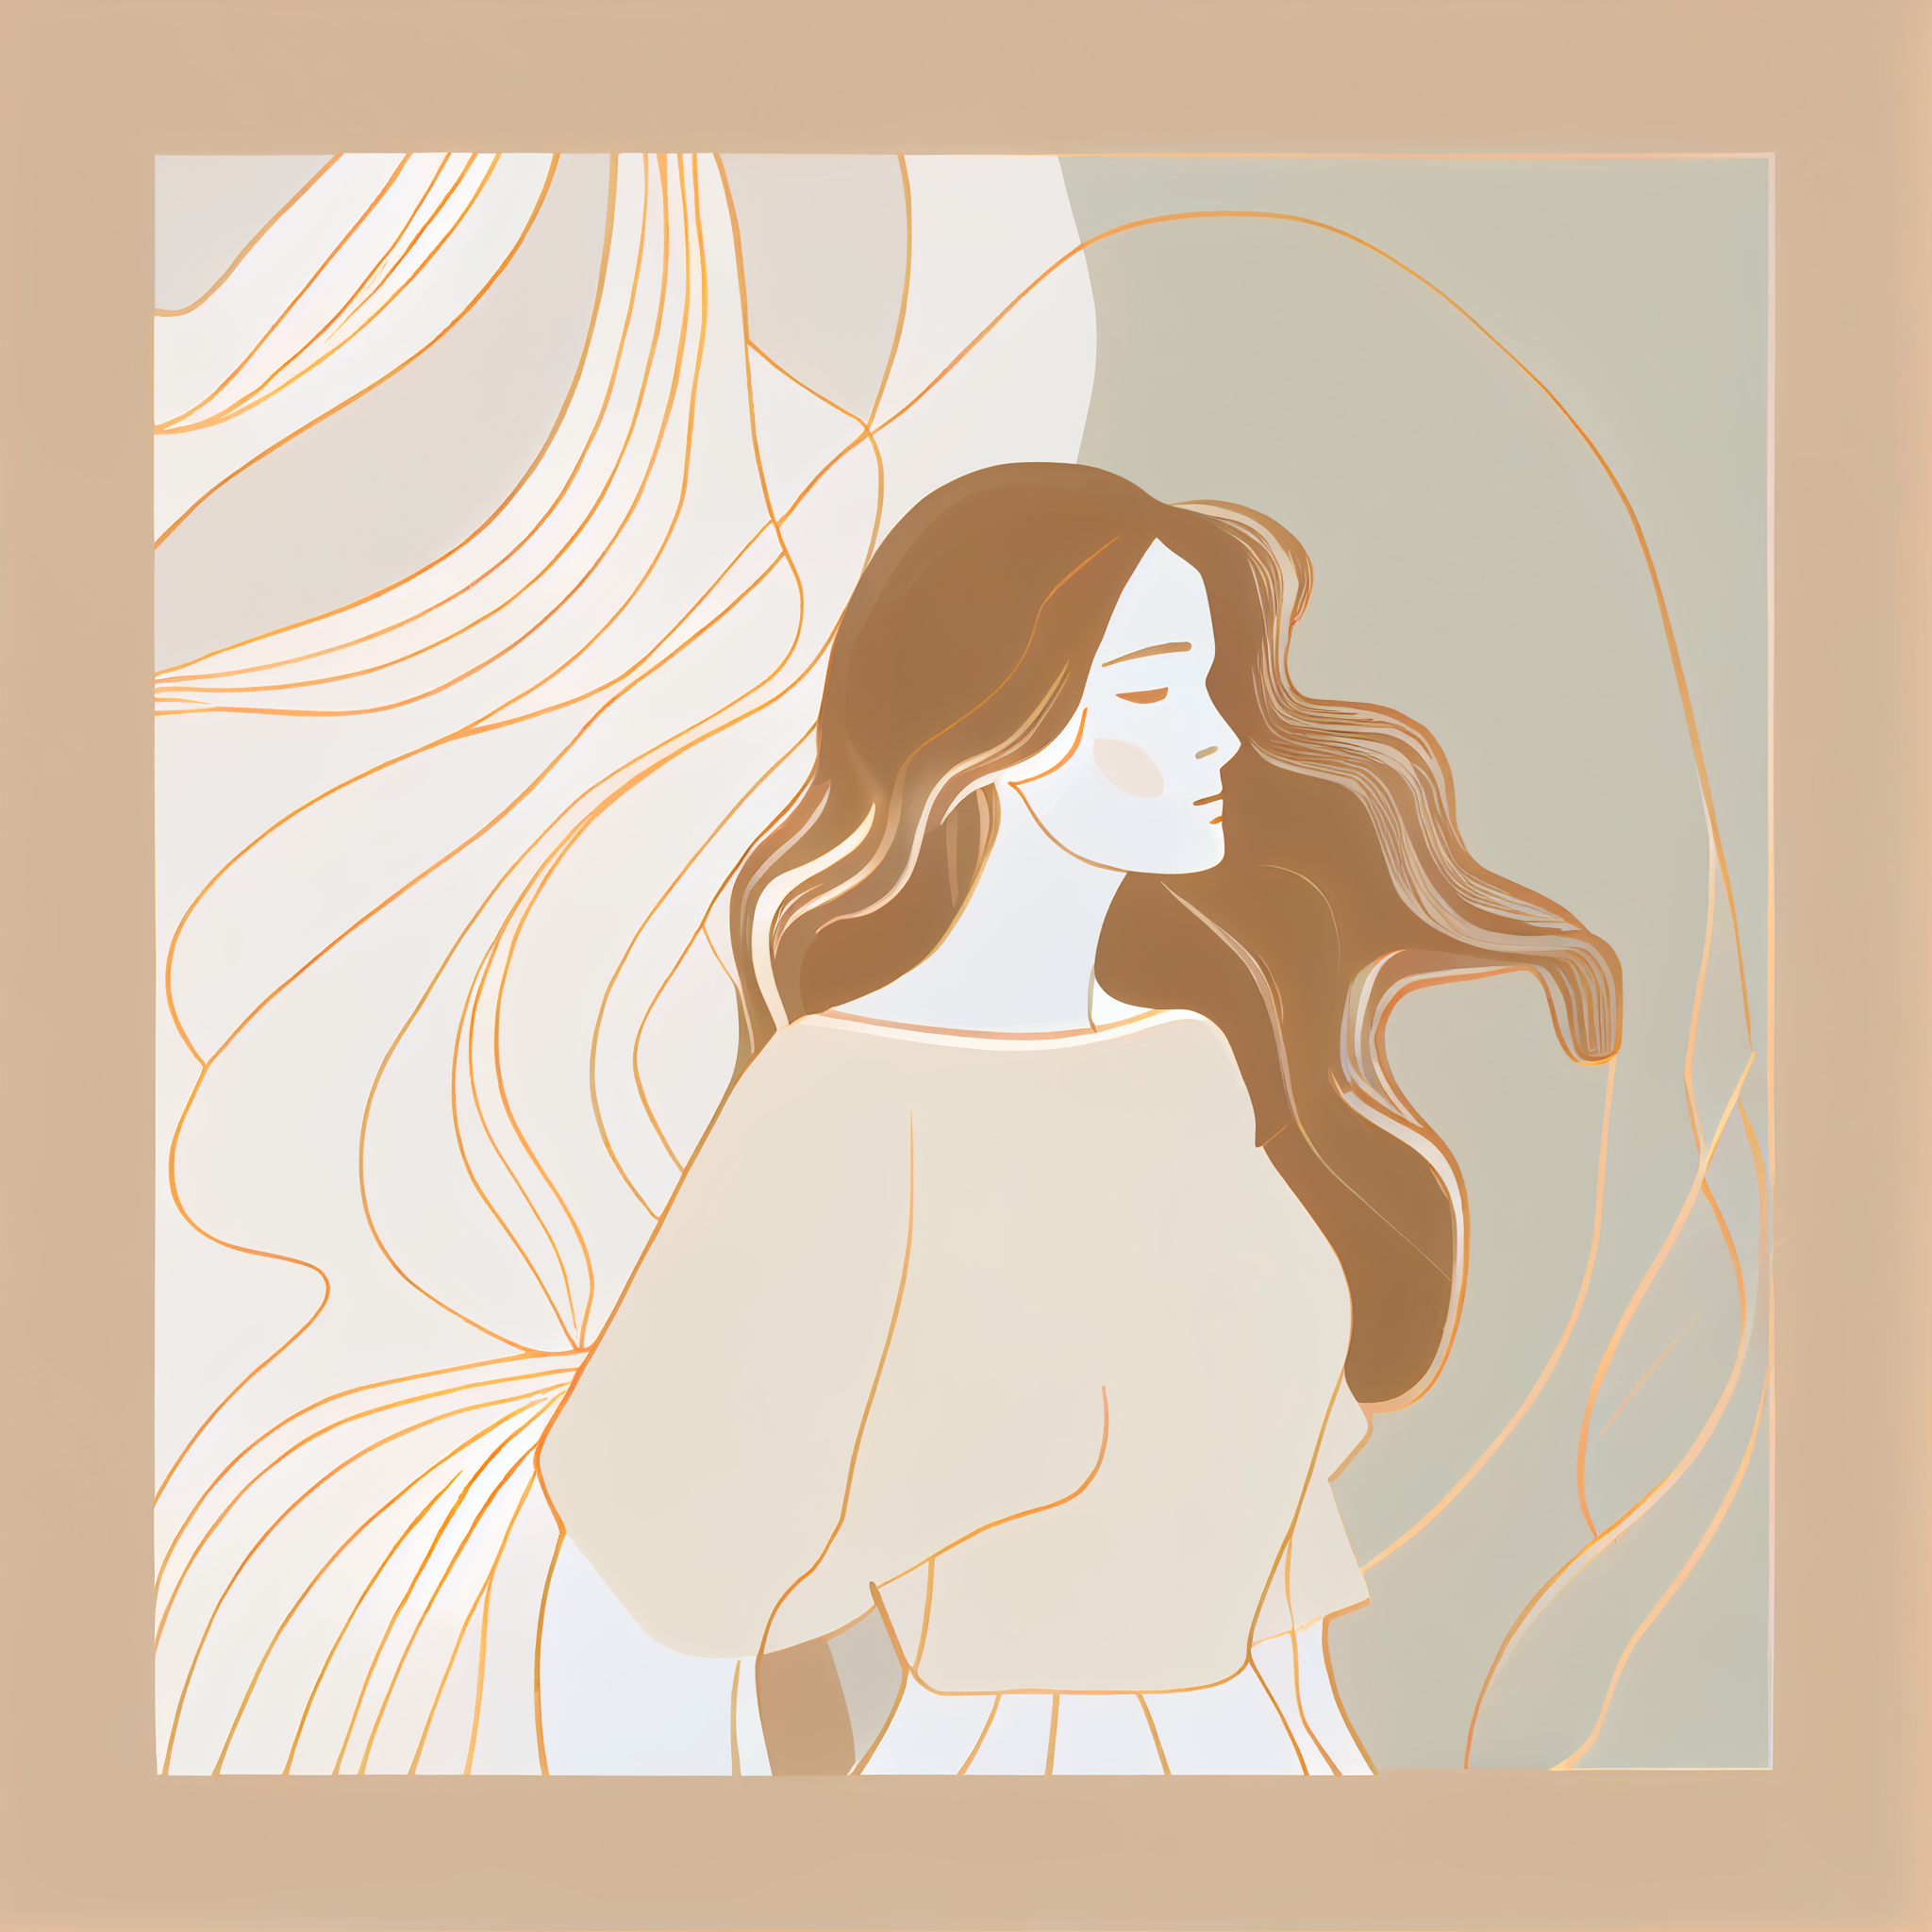 Graceful Simplicity: A Minimalistic Line Art Print of a Lady Against a Soft Pastel Background with Beige and White Shapes in Soft Neutrals